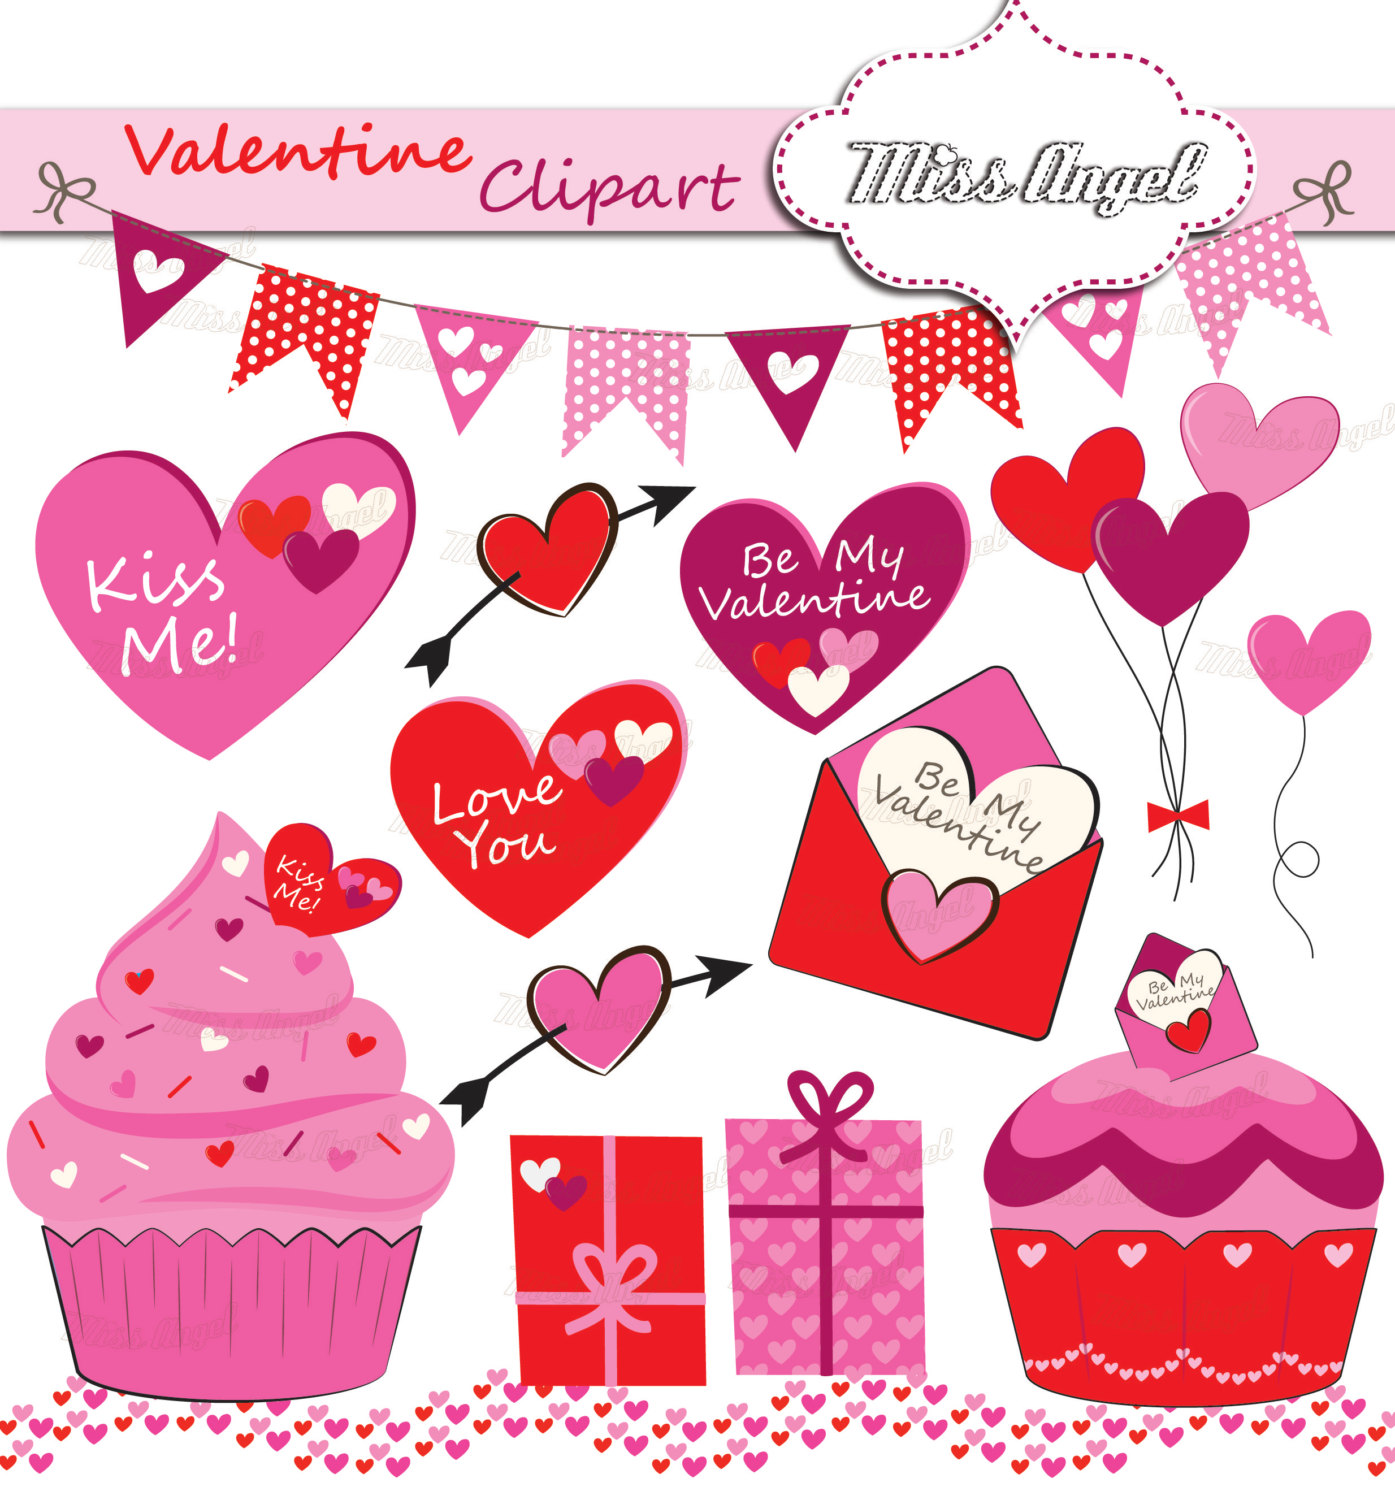 Valentines CLIPART, 14 romantic drawings. Valentines day clipart.